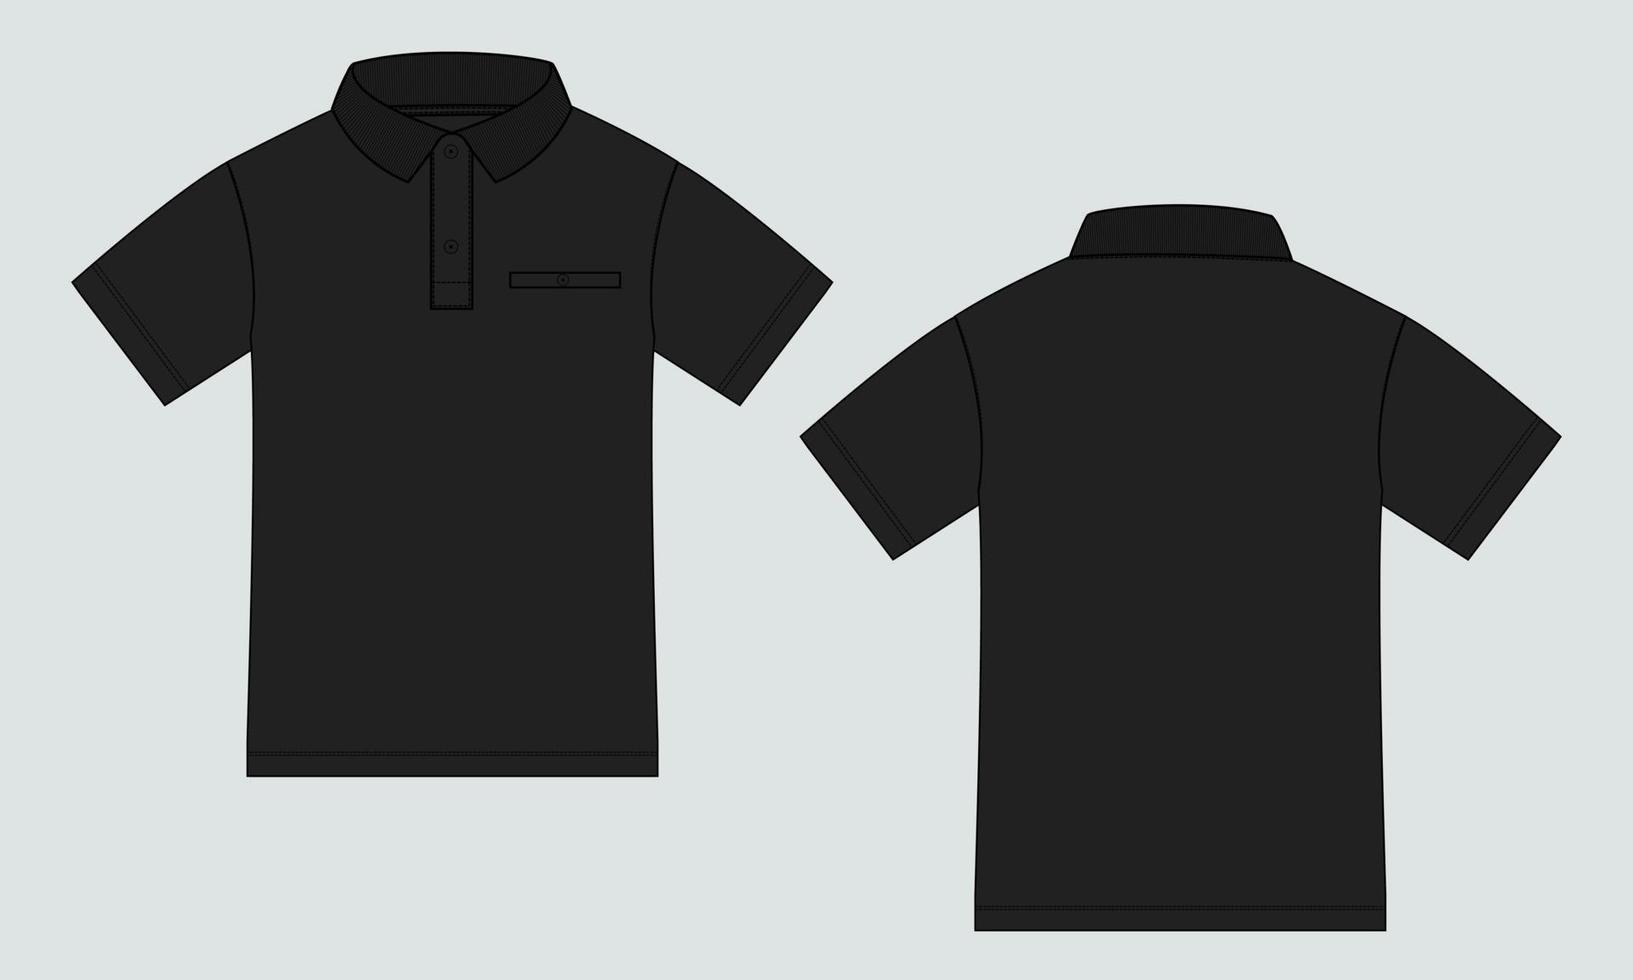 Short sleeve Polo shirt Technical Fashion flat sketch vector illustration black color template front and back views. Clothing design mock up for men's isolated on White background